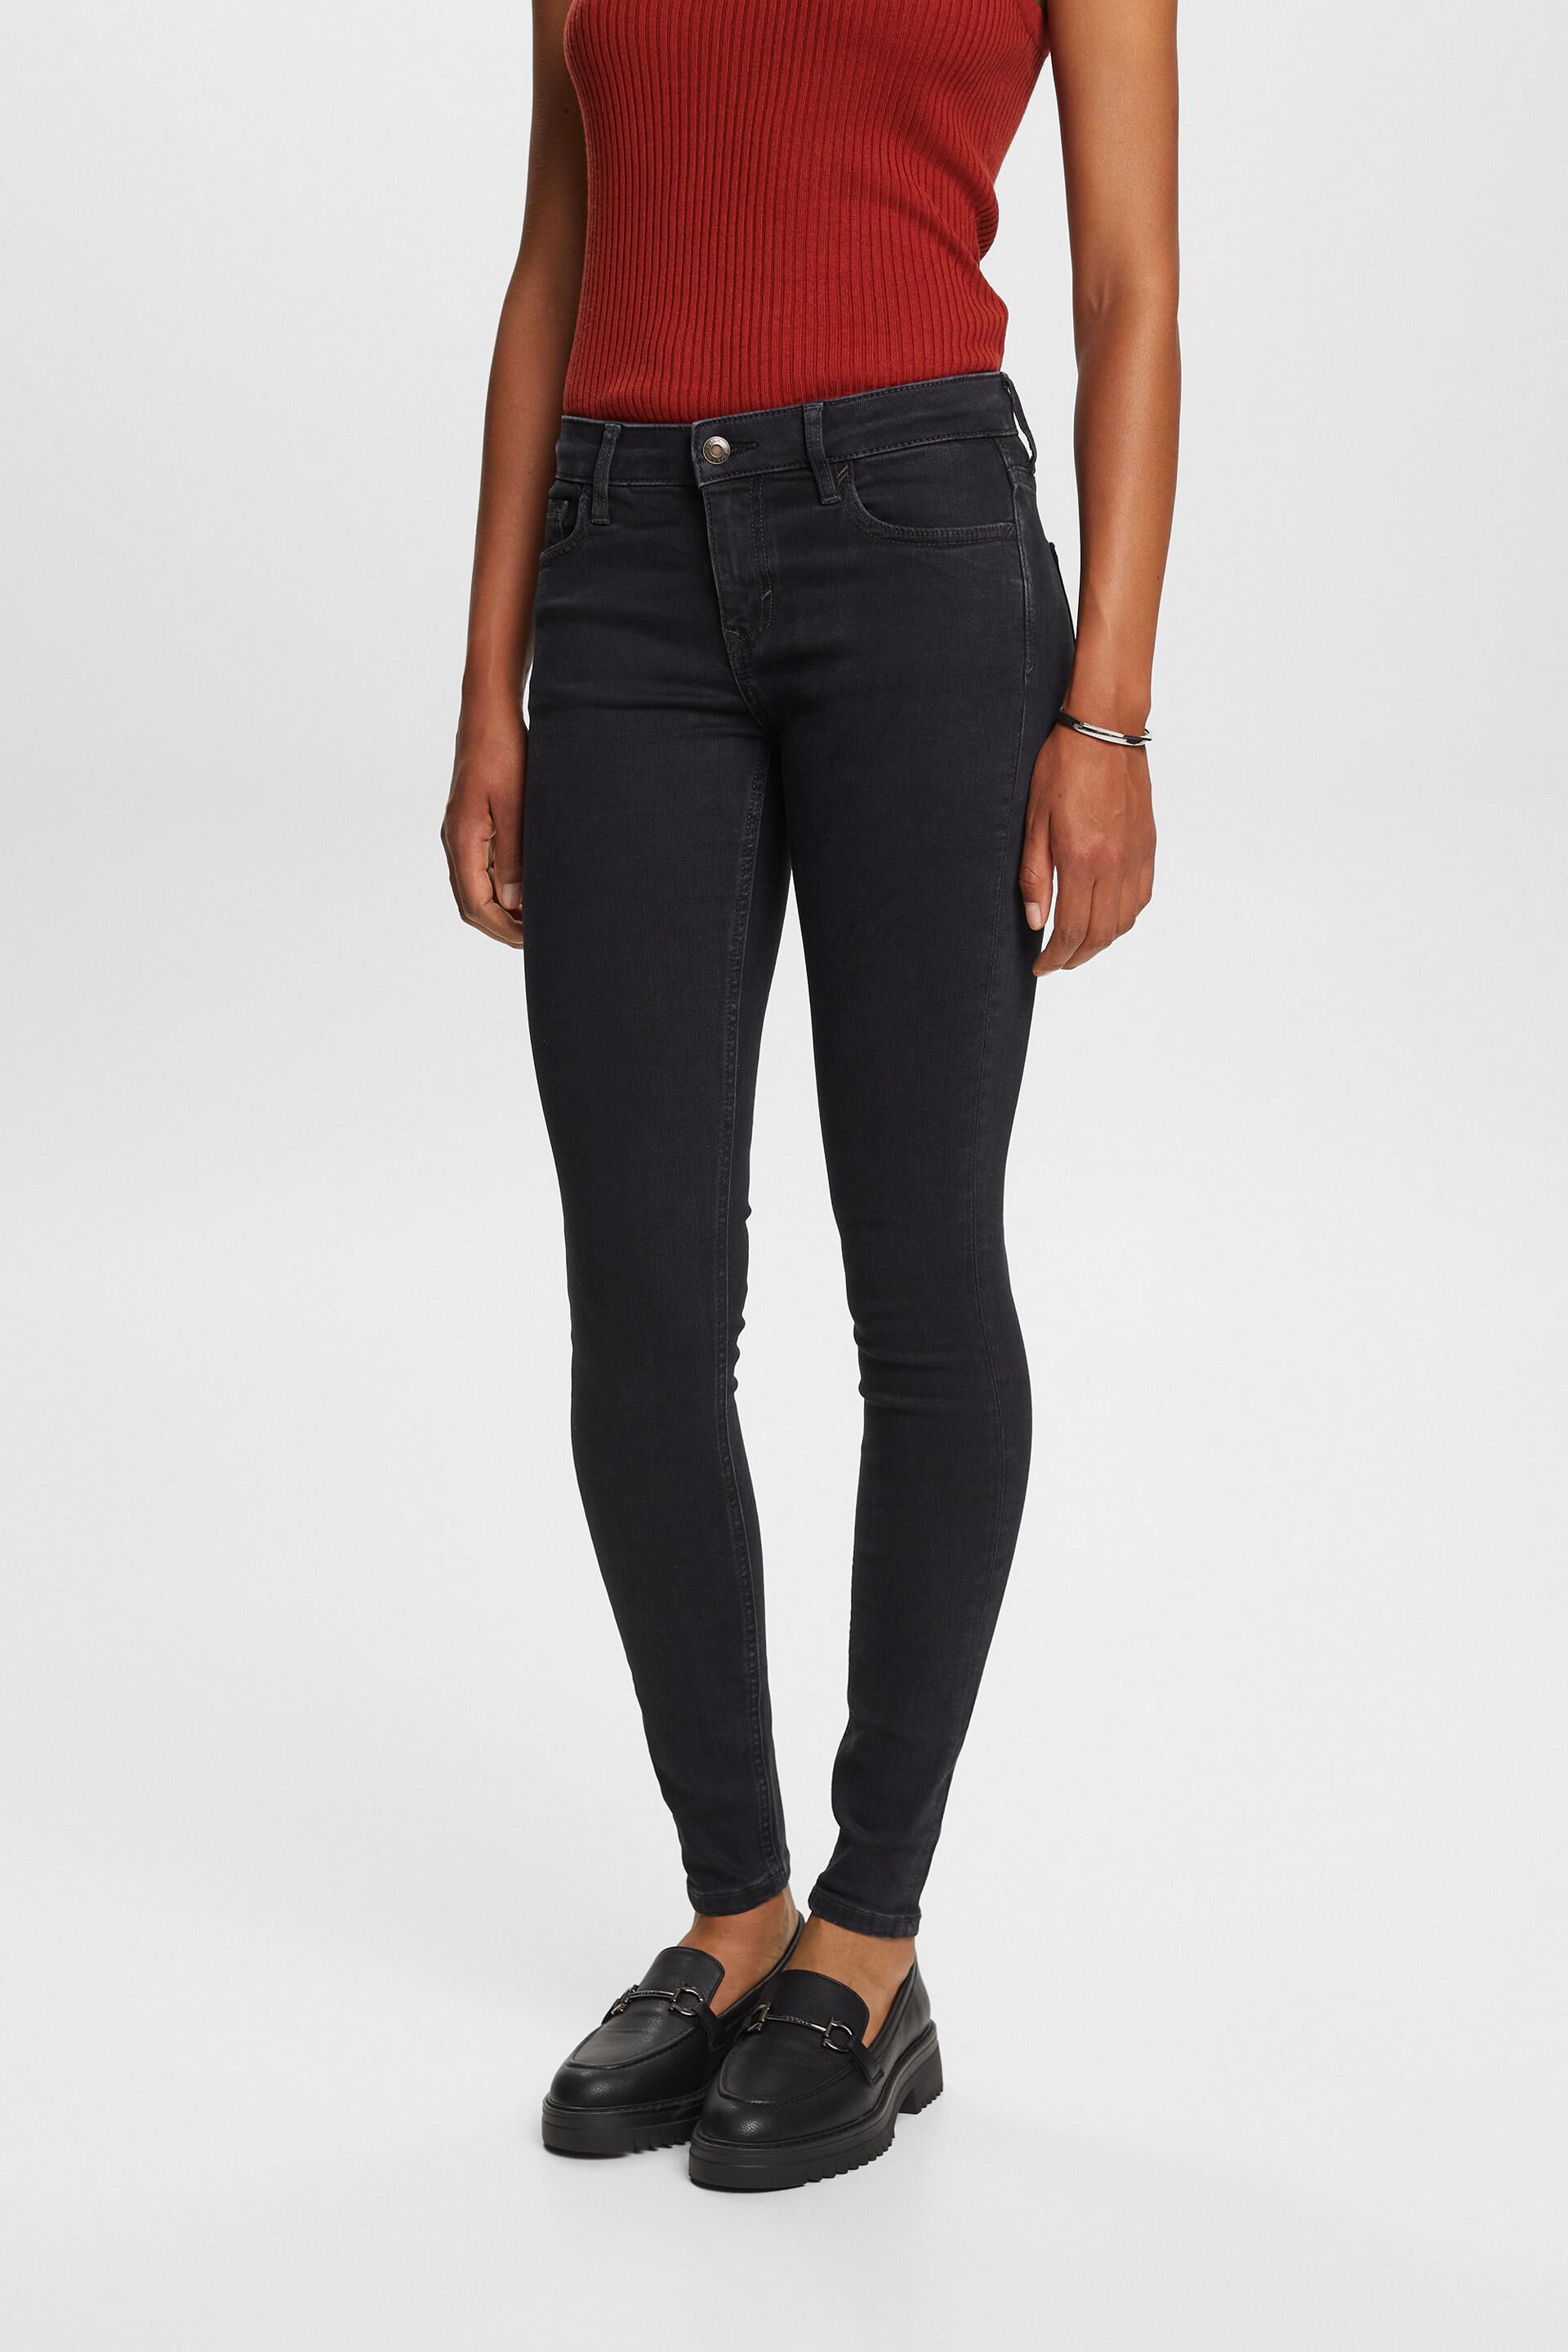 Esprit skinny mid-rise Recycled: jeans